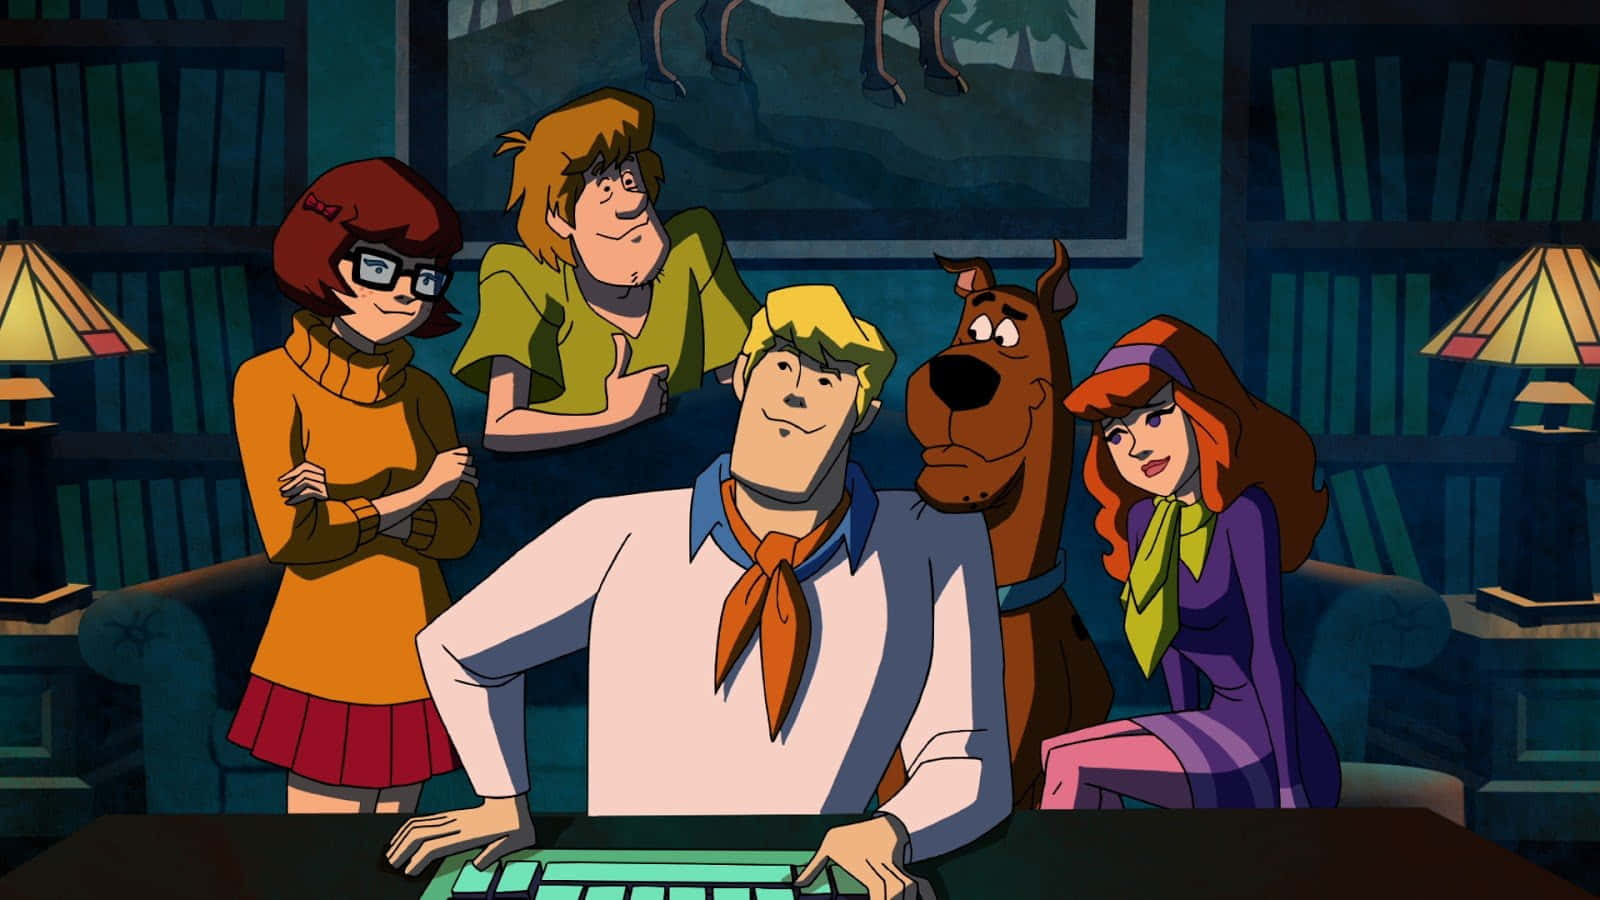 Come and join Scooby-Doo and the gang on their next spooky adventure!